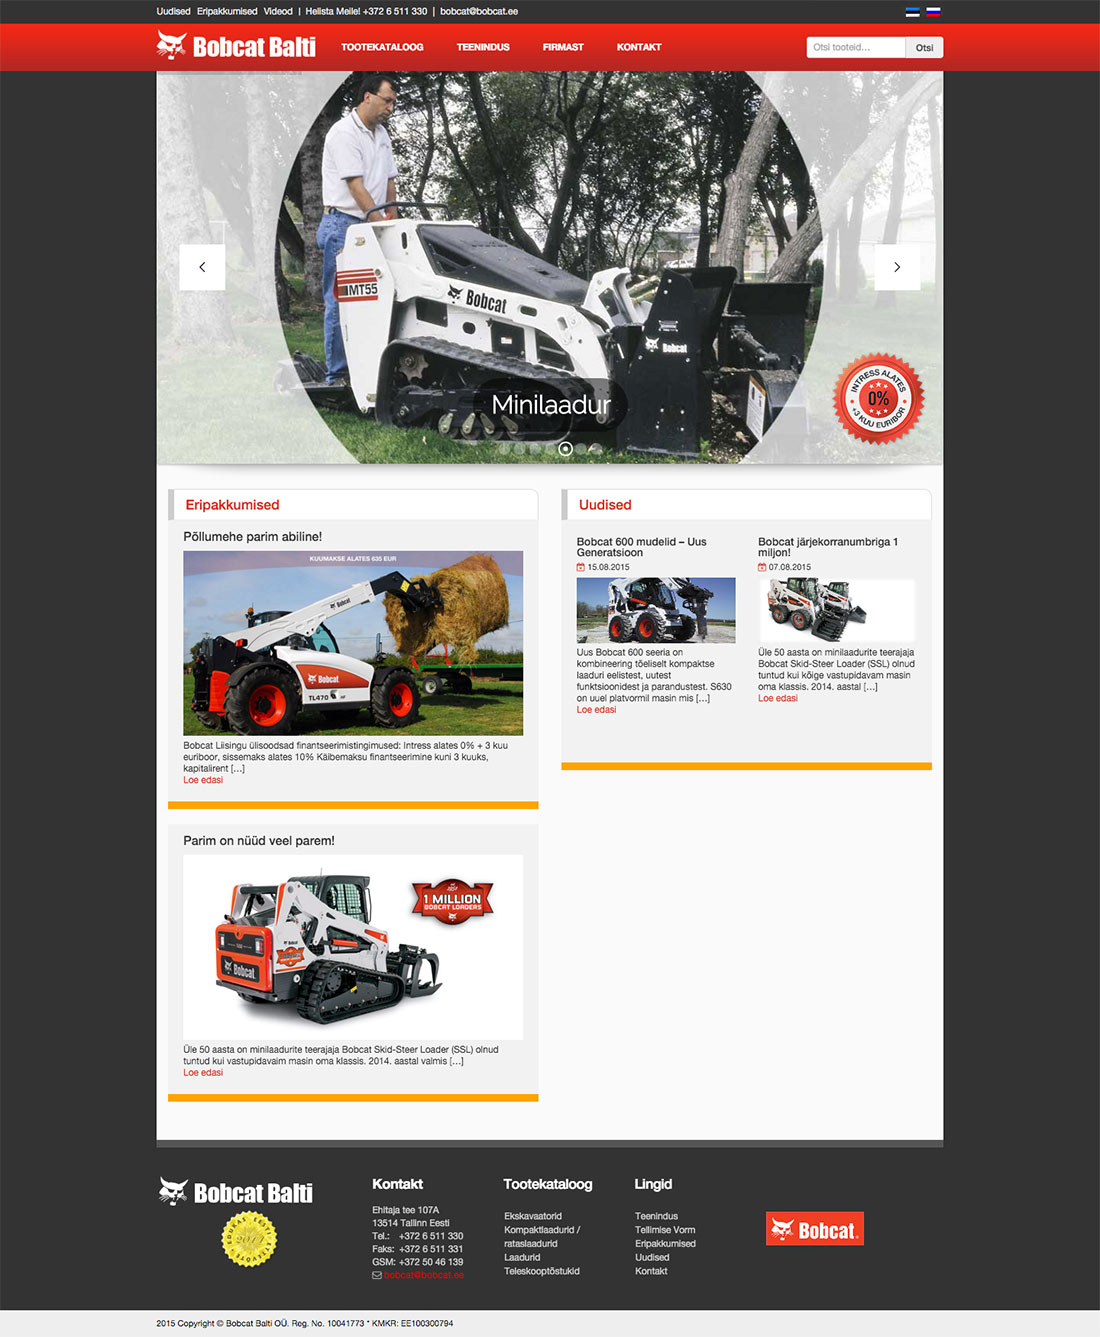 Internal page of the Bobcat Balti website, developed by iWeb, with details about services and products